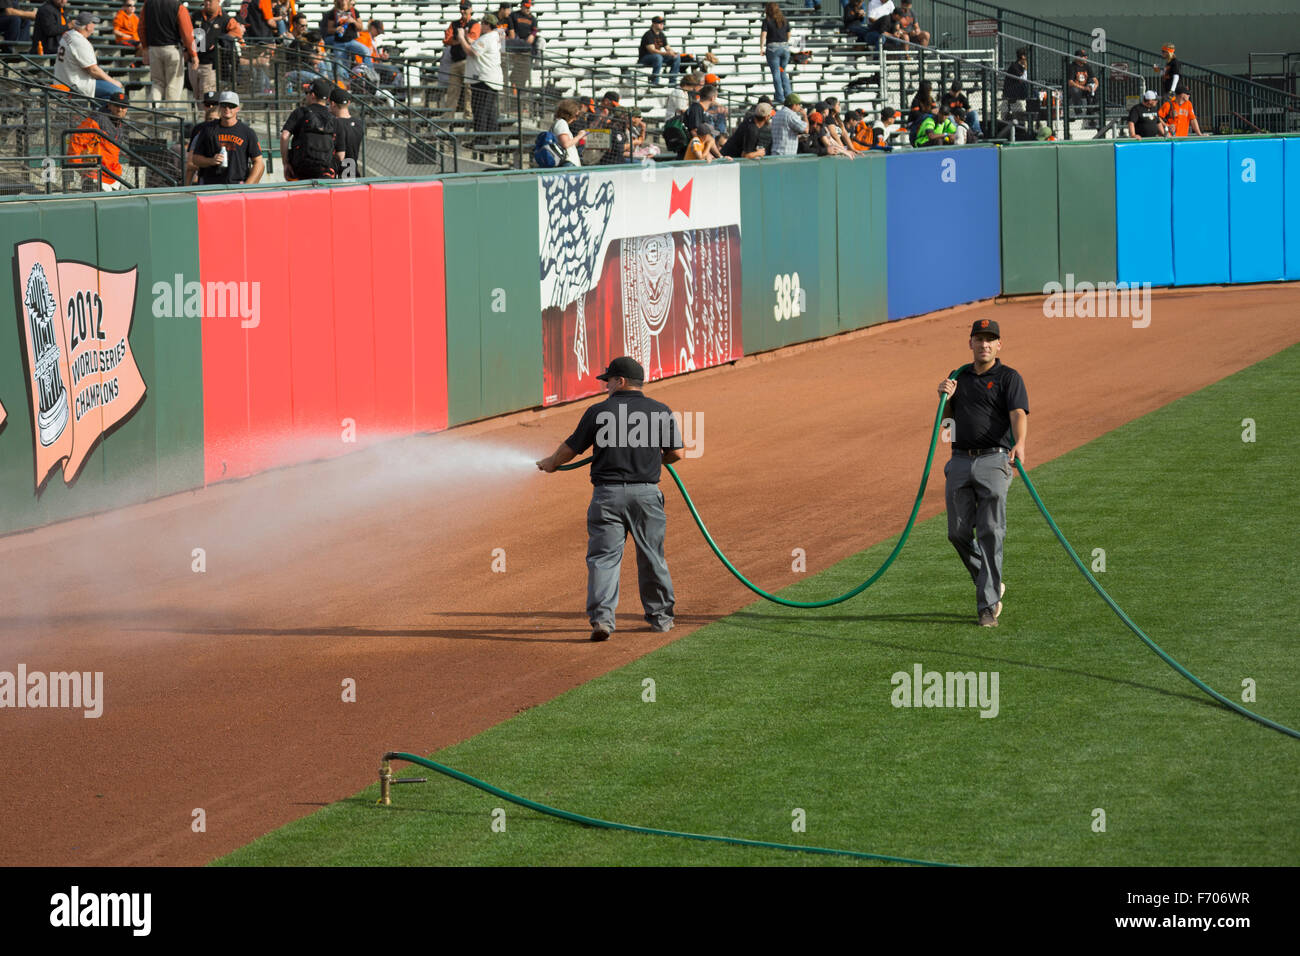 San Francisco, California, USA, October 16, 2014, AT&T Park, baseball stadium, SF Giants versus St. Louis Cardinals, National League Championship Series (NLCS), grounds crew squirts field Stock Photo